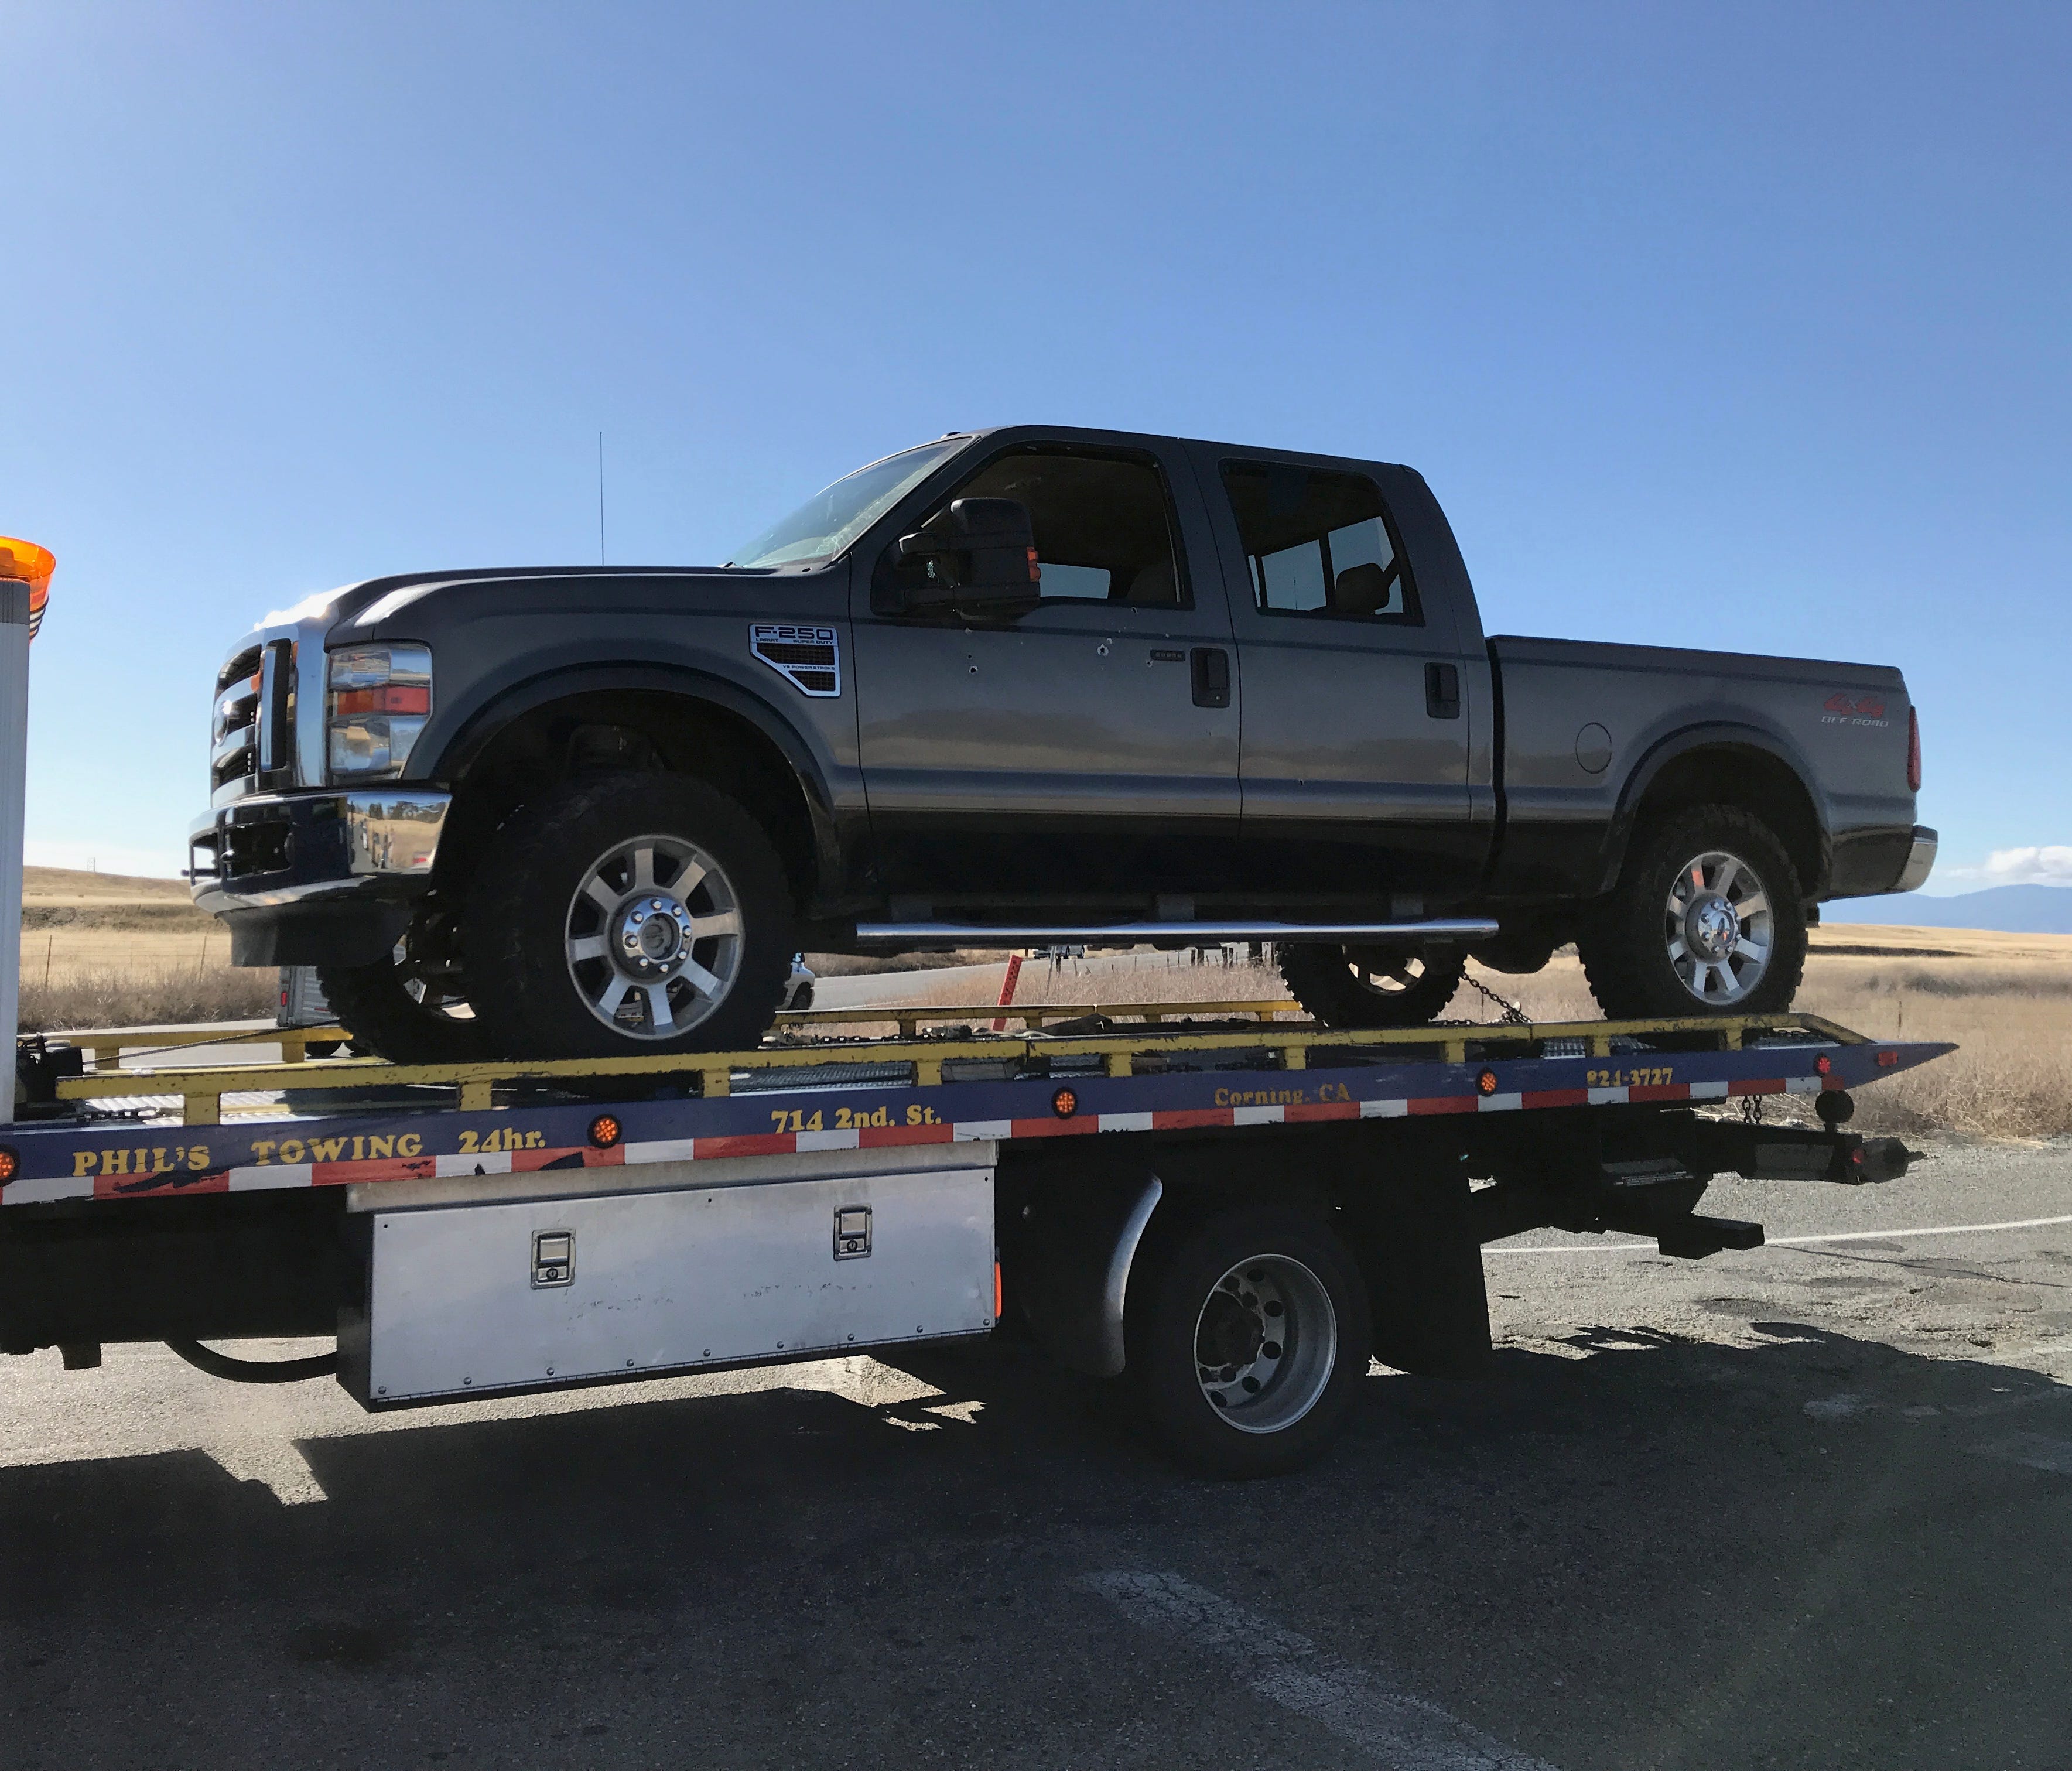 A tow truck removes a pickup with bullet holes in its side from Rancho Tehama on Tuesday. A shooter killed at least four people in a mass shooting in the Tehama County subdivision.